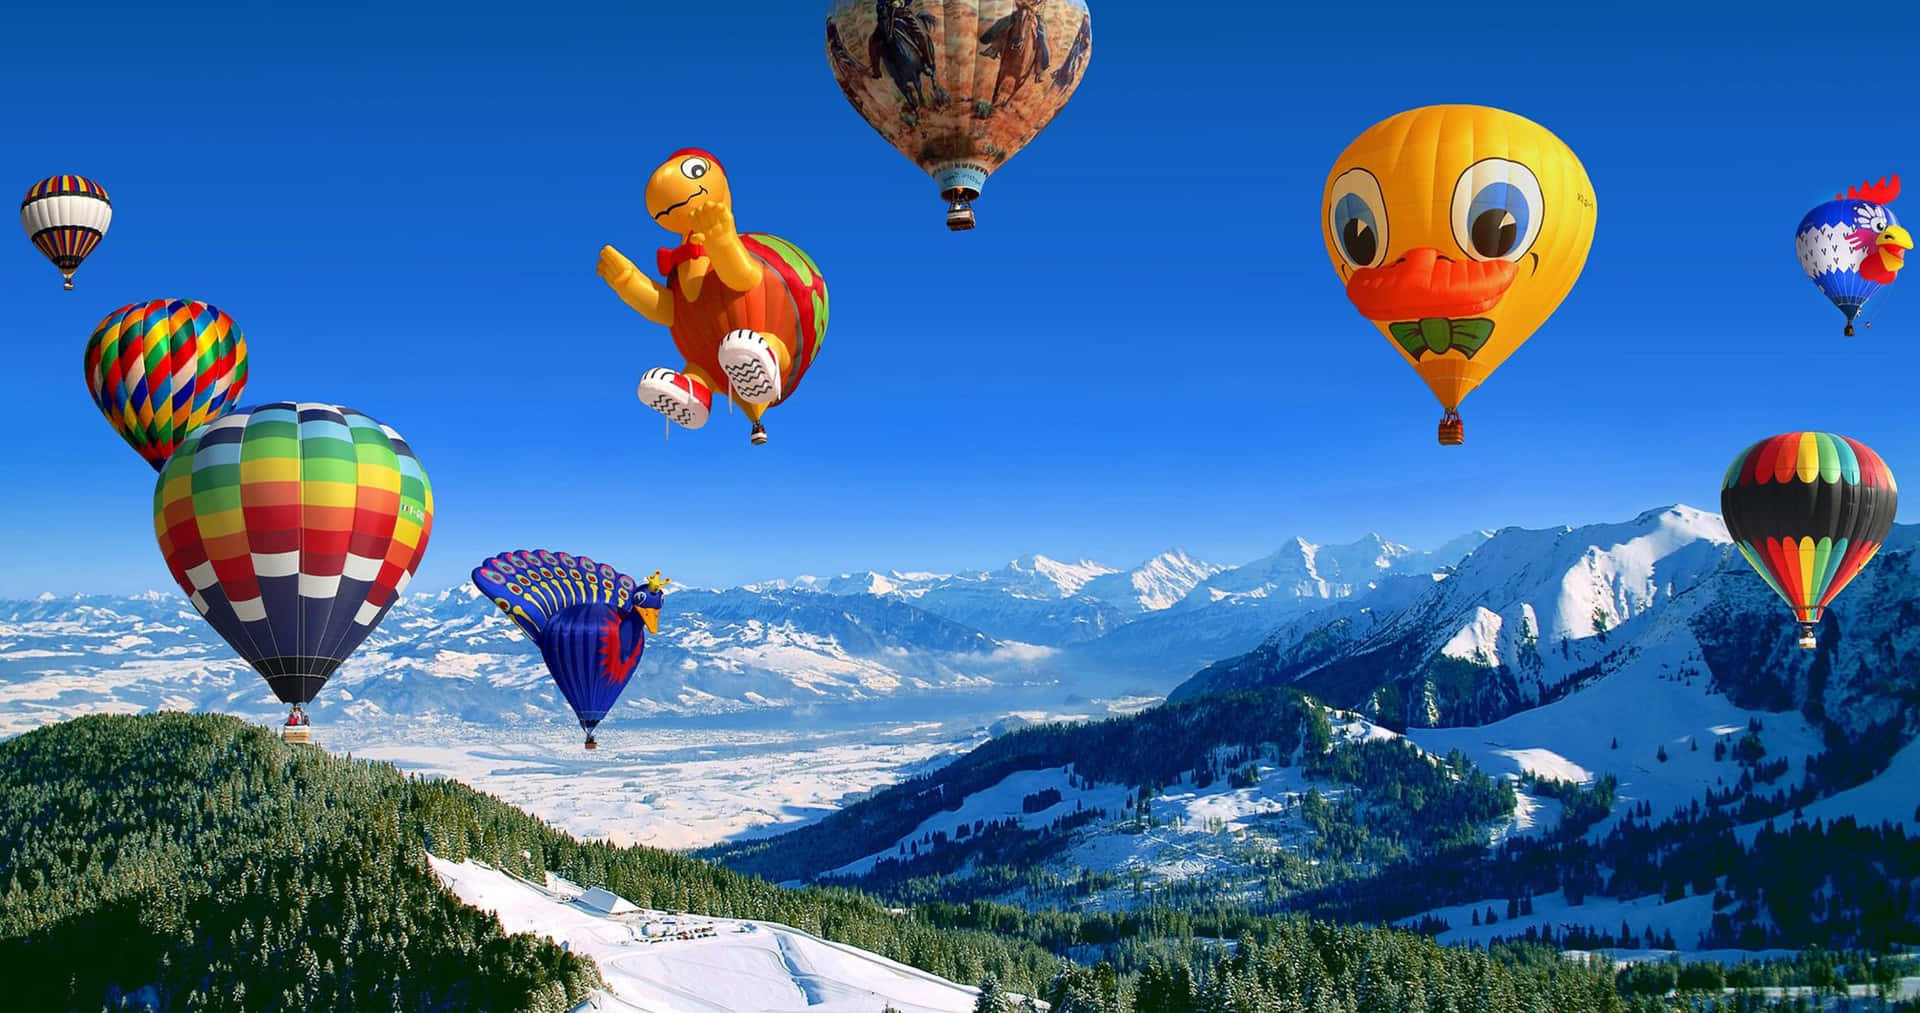 Soaring through Landscapes in a Hot Air Balloon